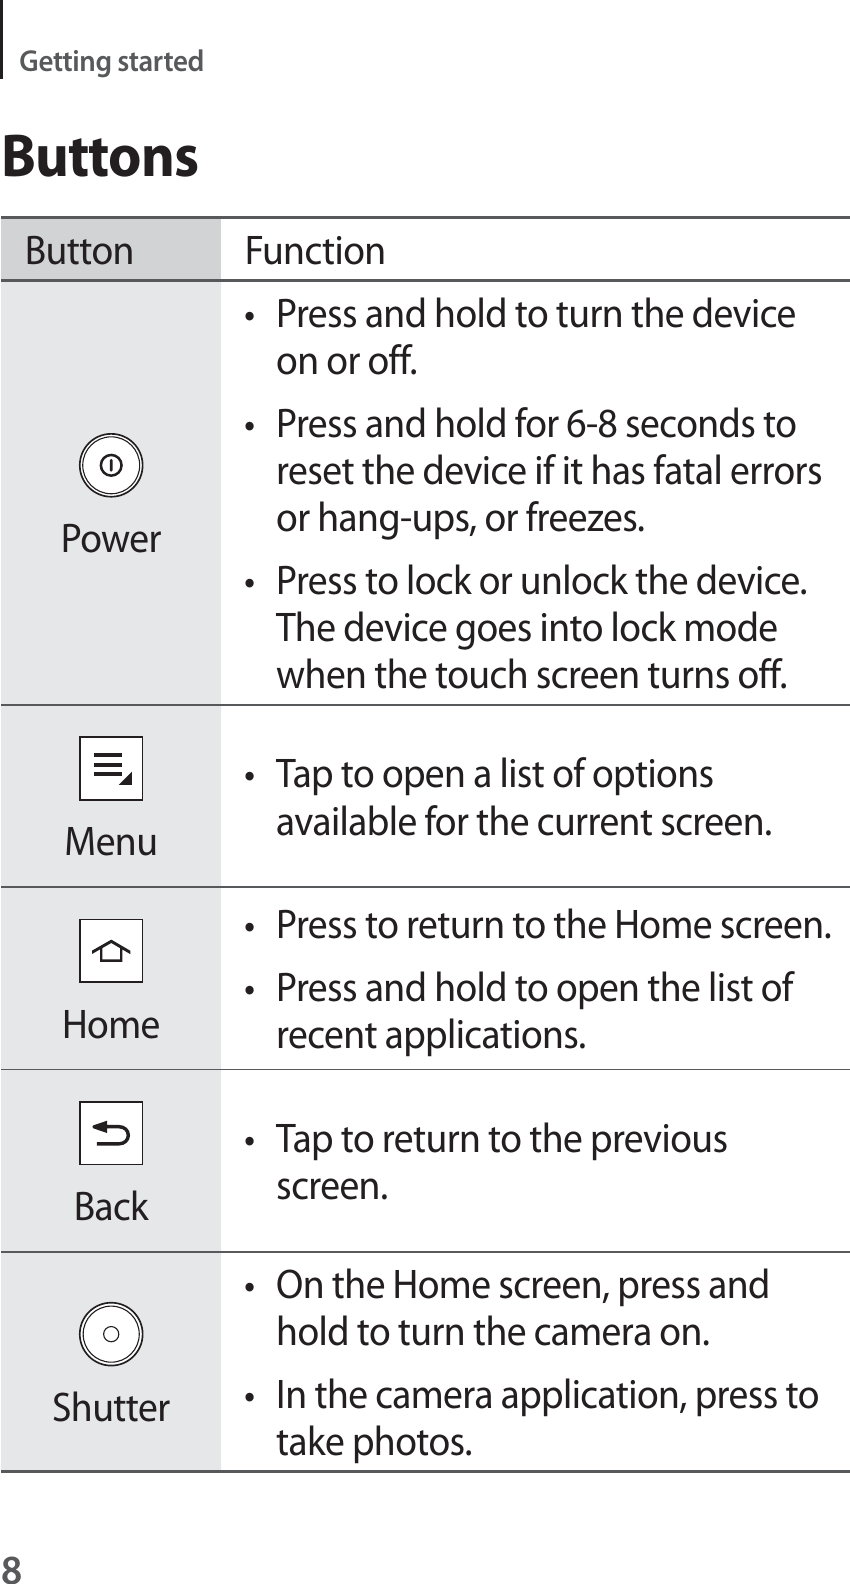 8Getting startedButtonsButton FunctionPowert Press and hold to turn the device on or off.t Press and hold for 6-8 seconds to reset the device if it has fatal errors or hang-ups, or freezes.t Press to lock or unlock the device. The device goes into lock mode when the touch screen turns off.Menut Tap to open a list of options available for the current screen.Homet Press to return to the Home screen.t Press and hold to open the list of recent applications.Backt Tap to return to the previous screen.Shuttert On the Home screen, press and hold to turn the camera on.t In the camera application, press to take photos.